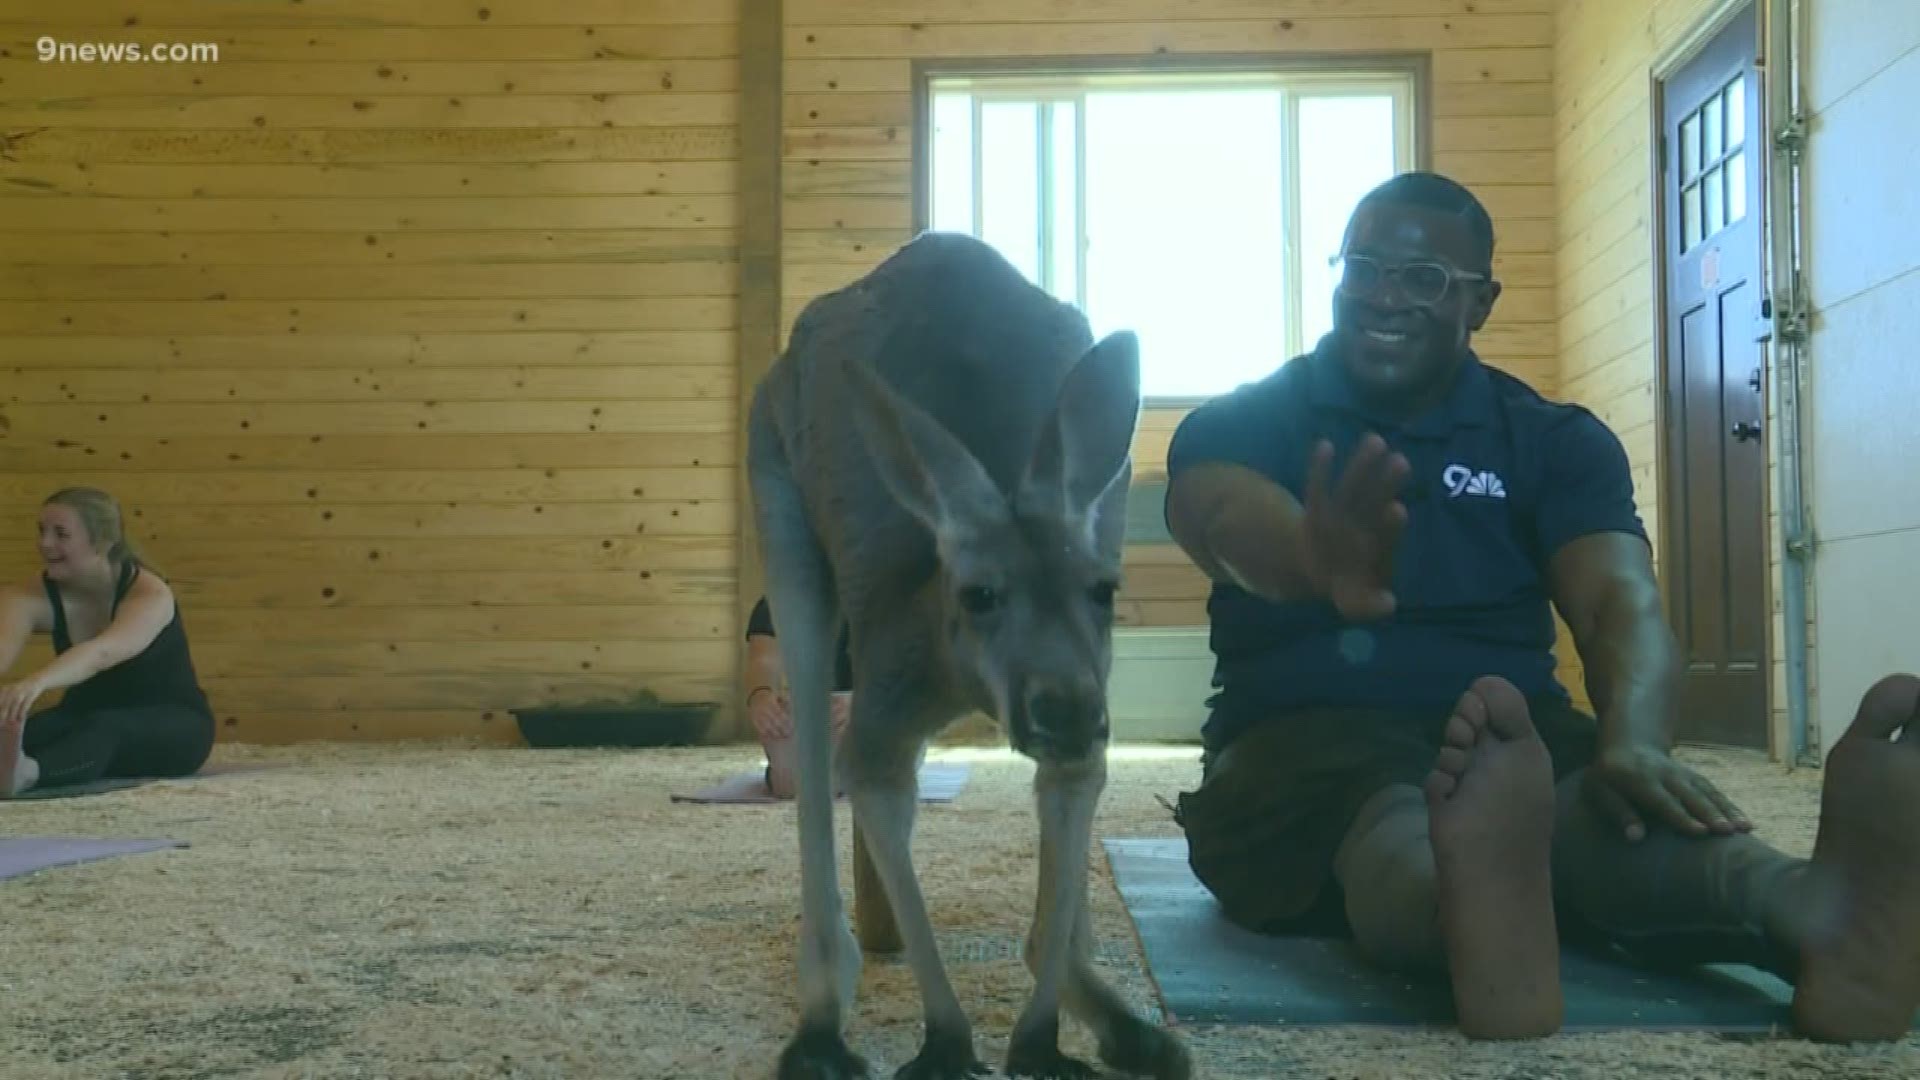 Looking to spice up your yoga routine? Why not add kangaroos? You can do that at the Zoo Chateau in Golden. (zoochateau.com)